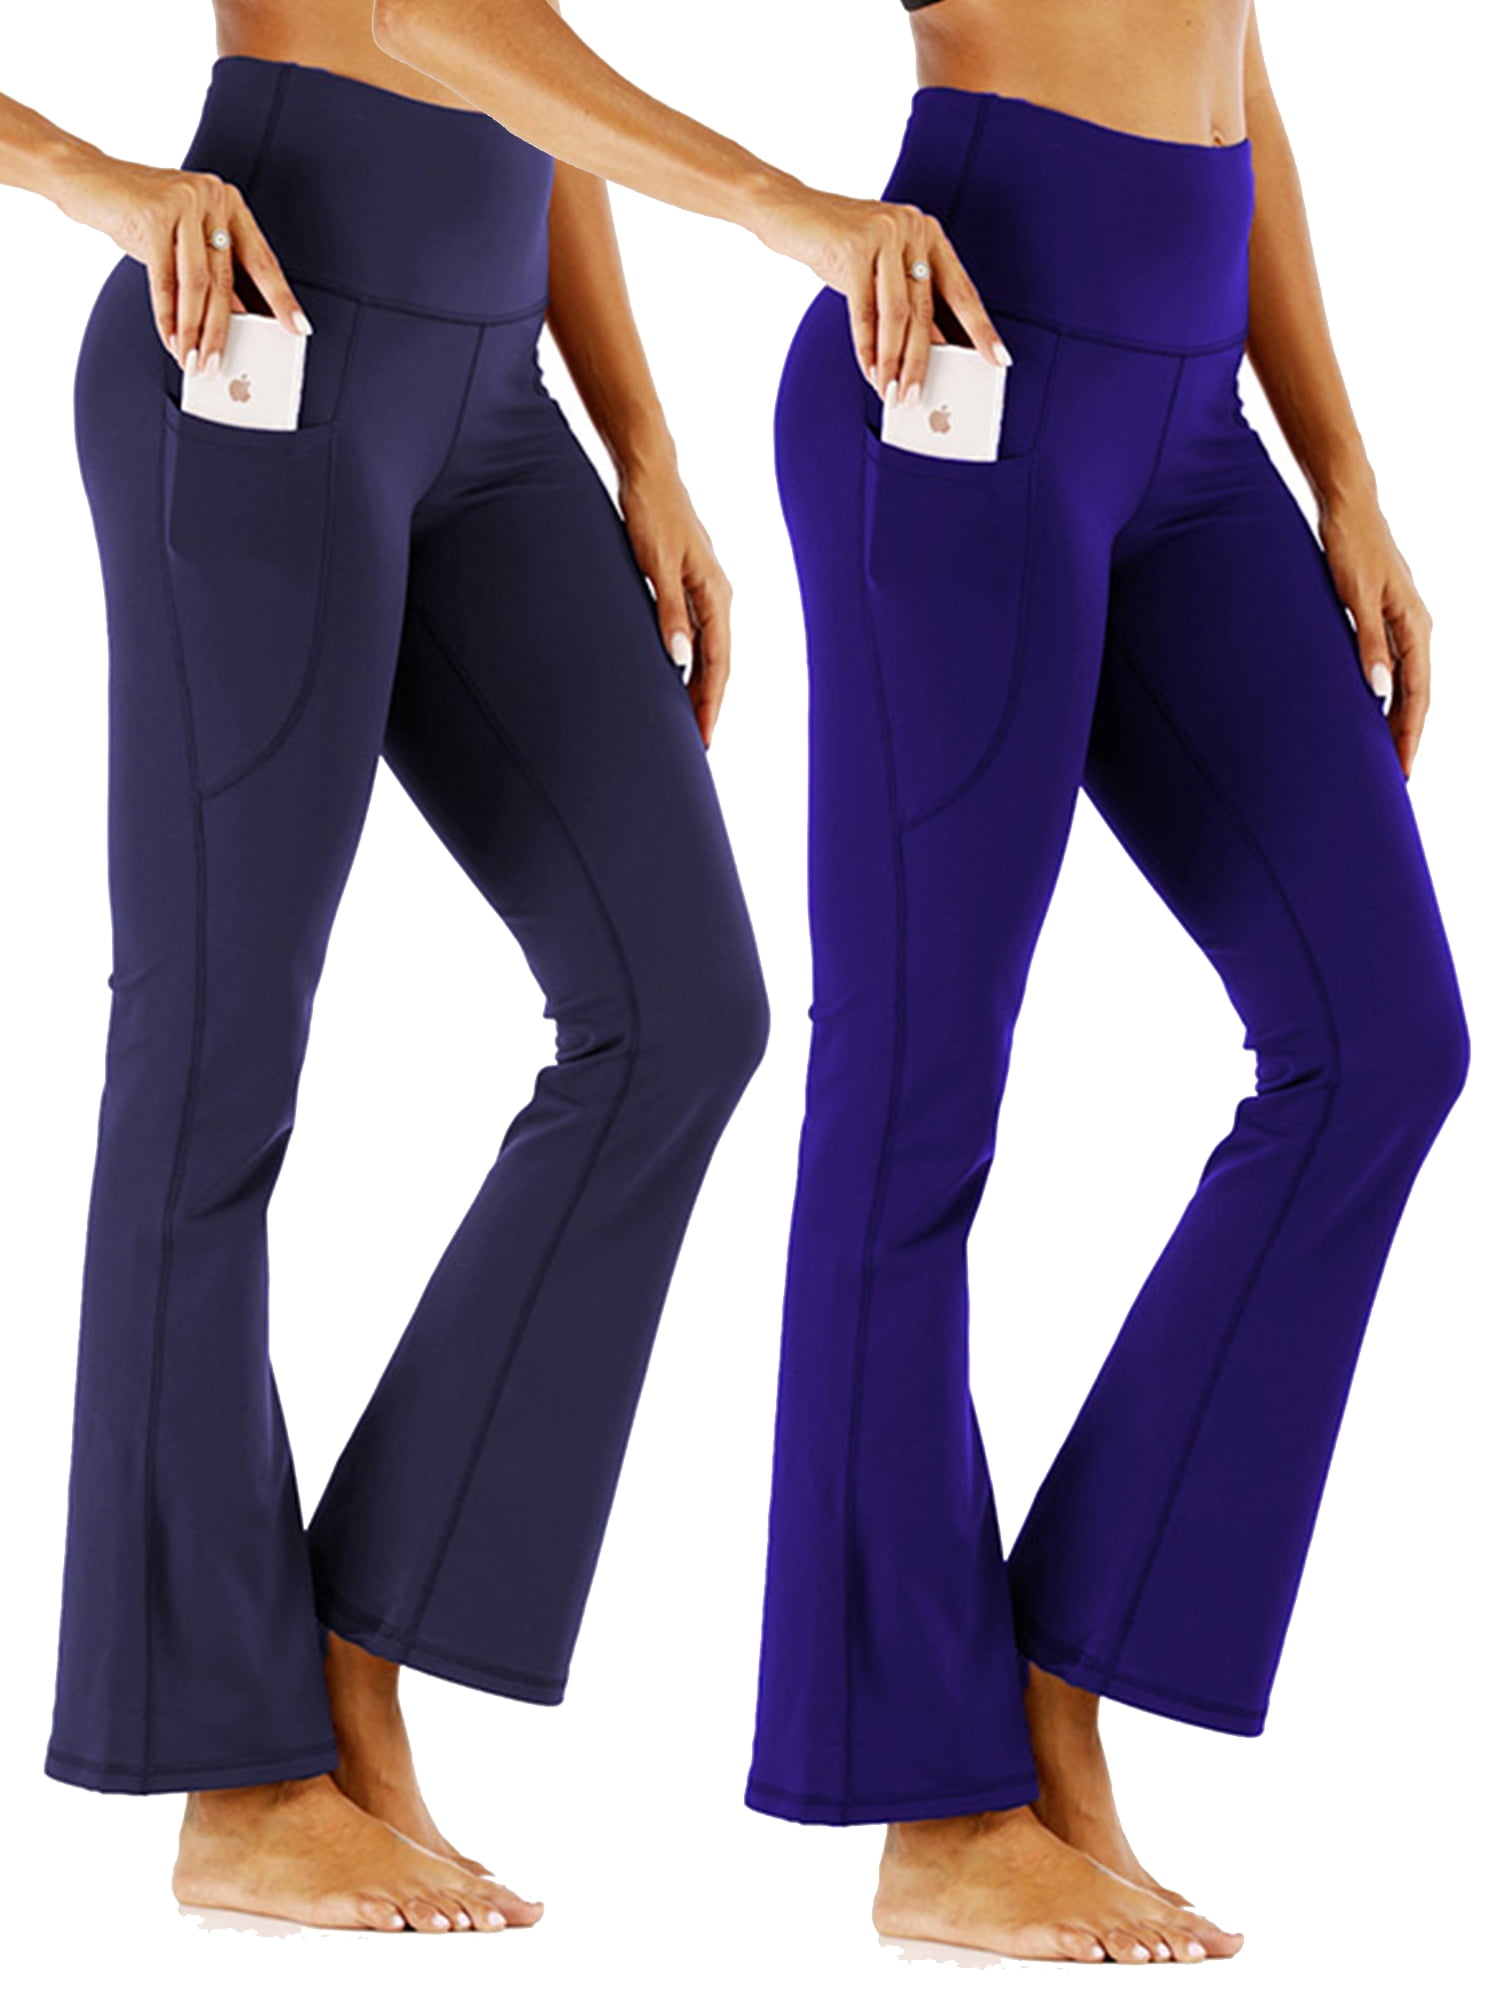 ALONG FIT Bootcut Yoga Pants for Women with Pockets Bootleg Dress Pants High-Waisted-Tummy-Control-Flared-Workout-Pants 